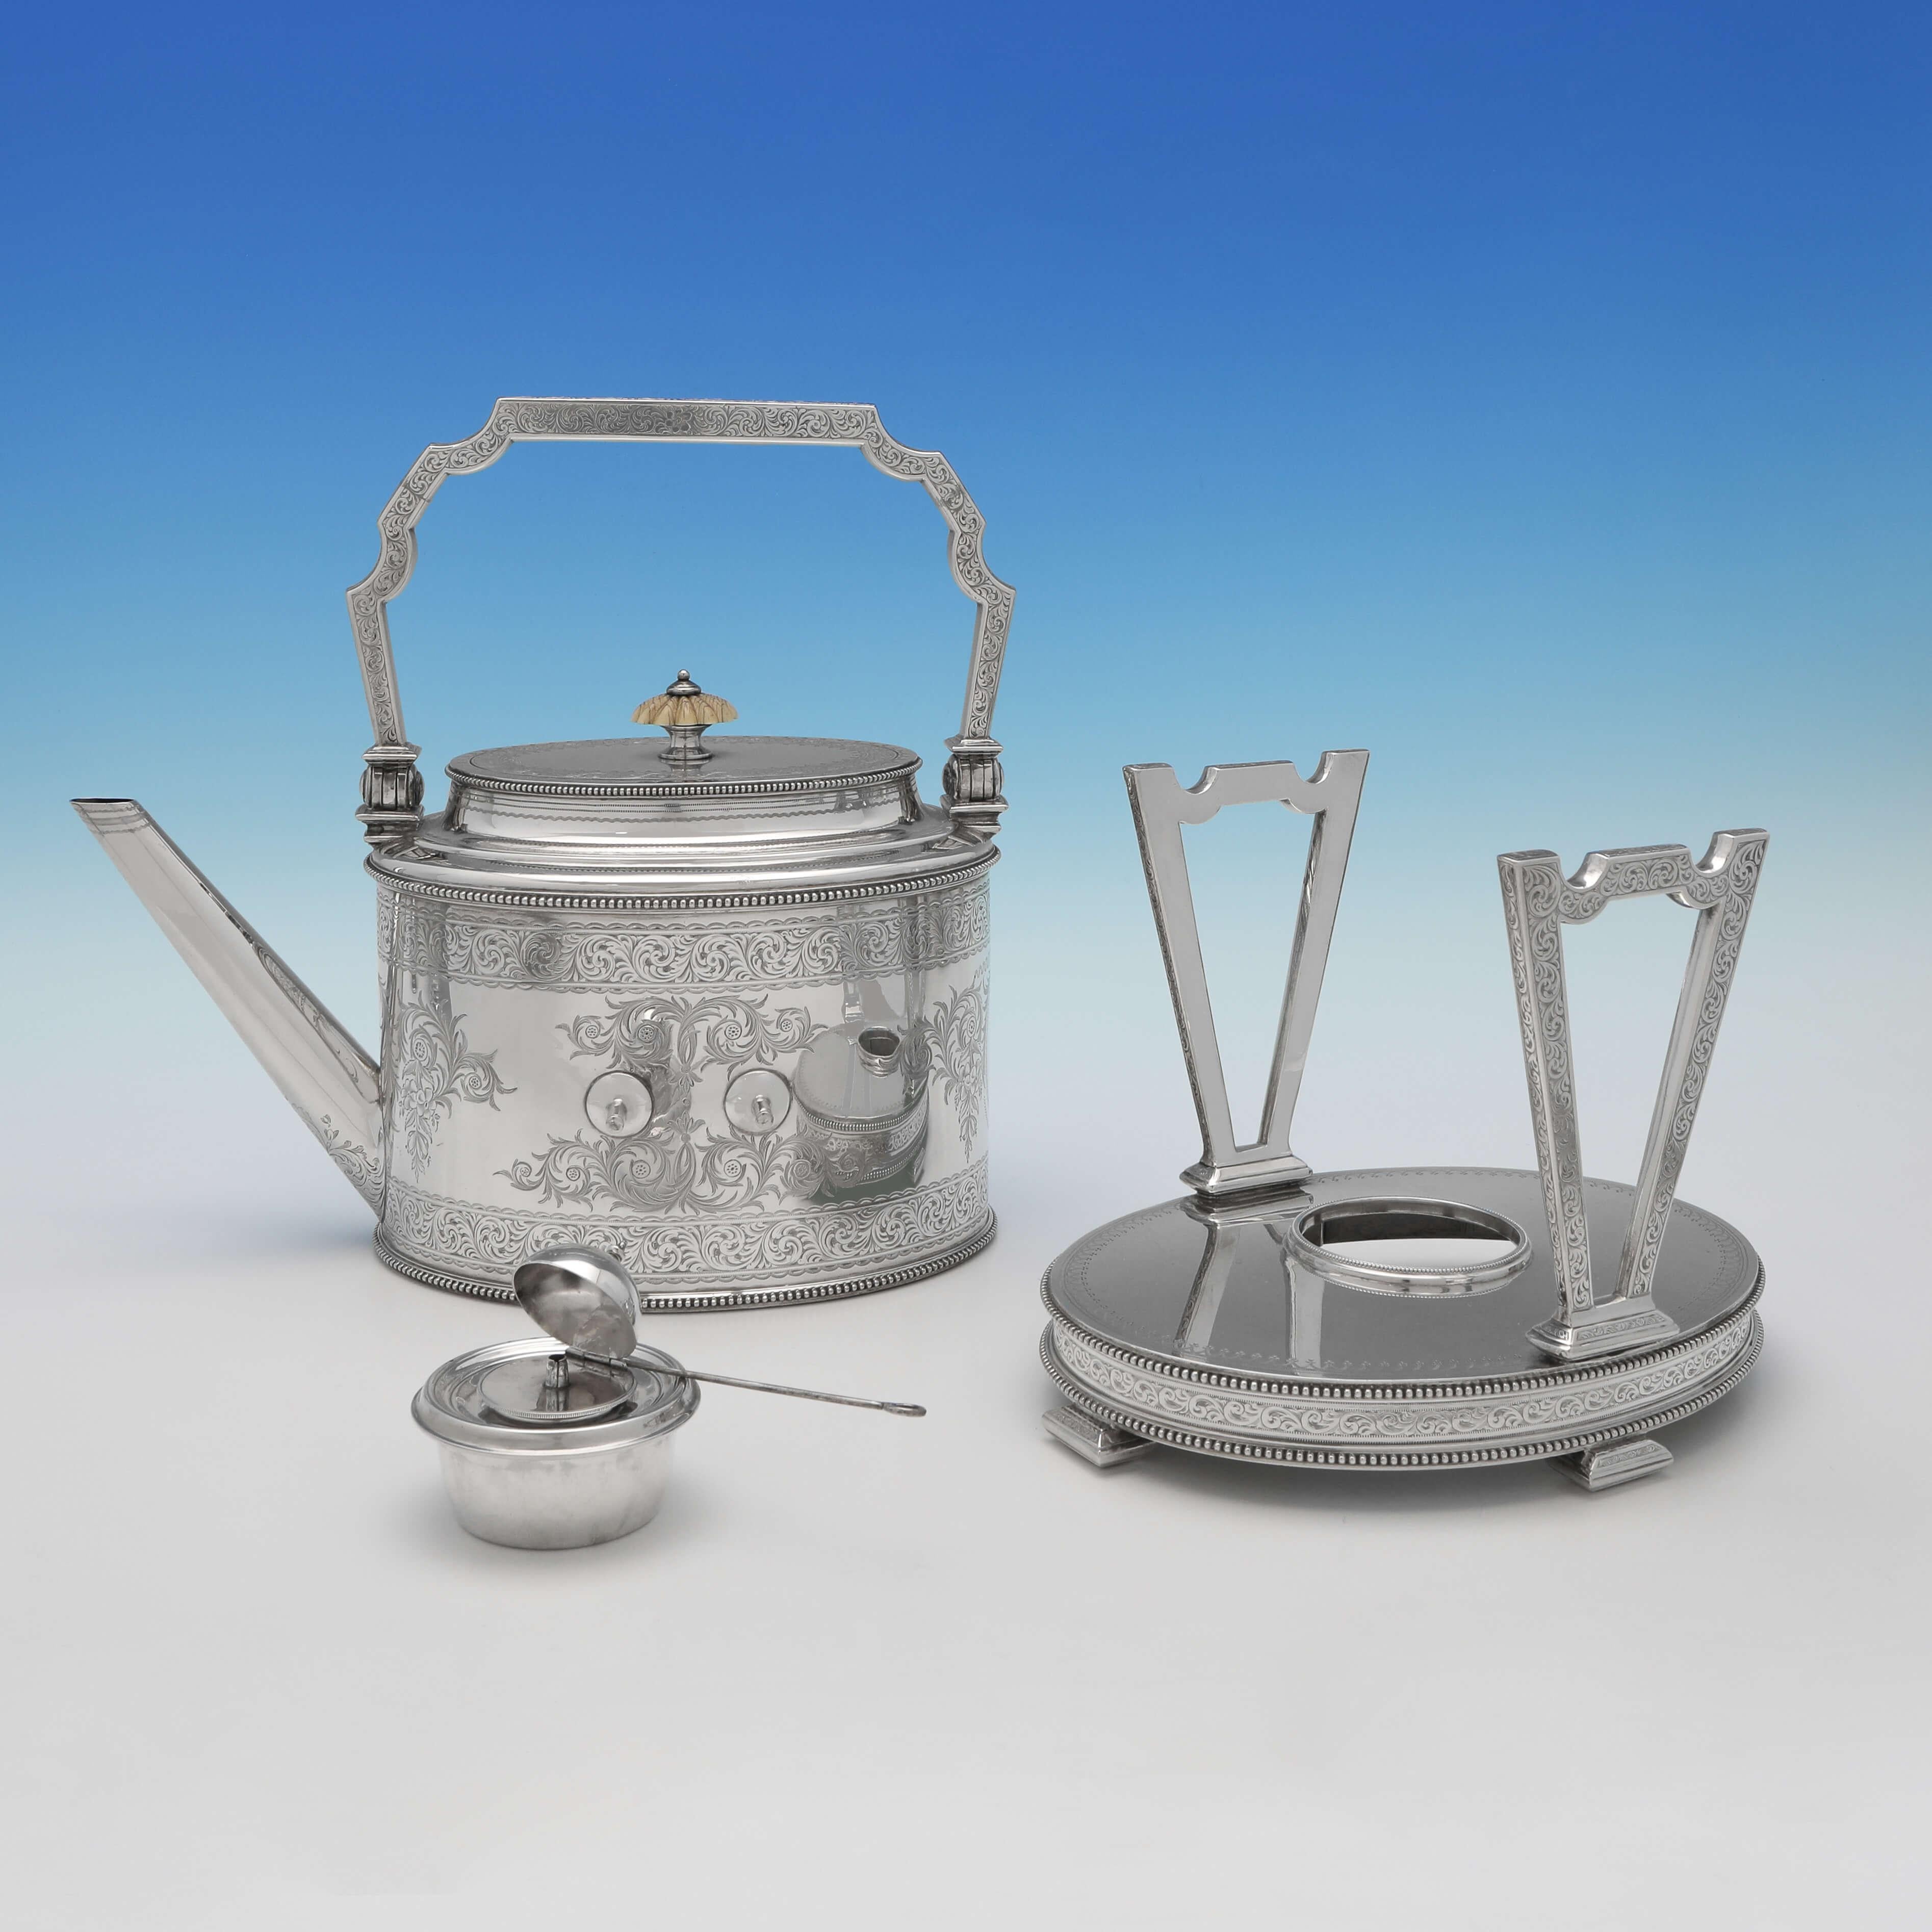 Hallmarked in Birmingham between 1873 and 1876 by Elkington & Co., this striking, Victorian, antique sterling silver tea & coffee set, comprises a kettle, a coffee pot, a teapot, a sugar bowl and a cream jug, all in the 'Can' shape, and featuring